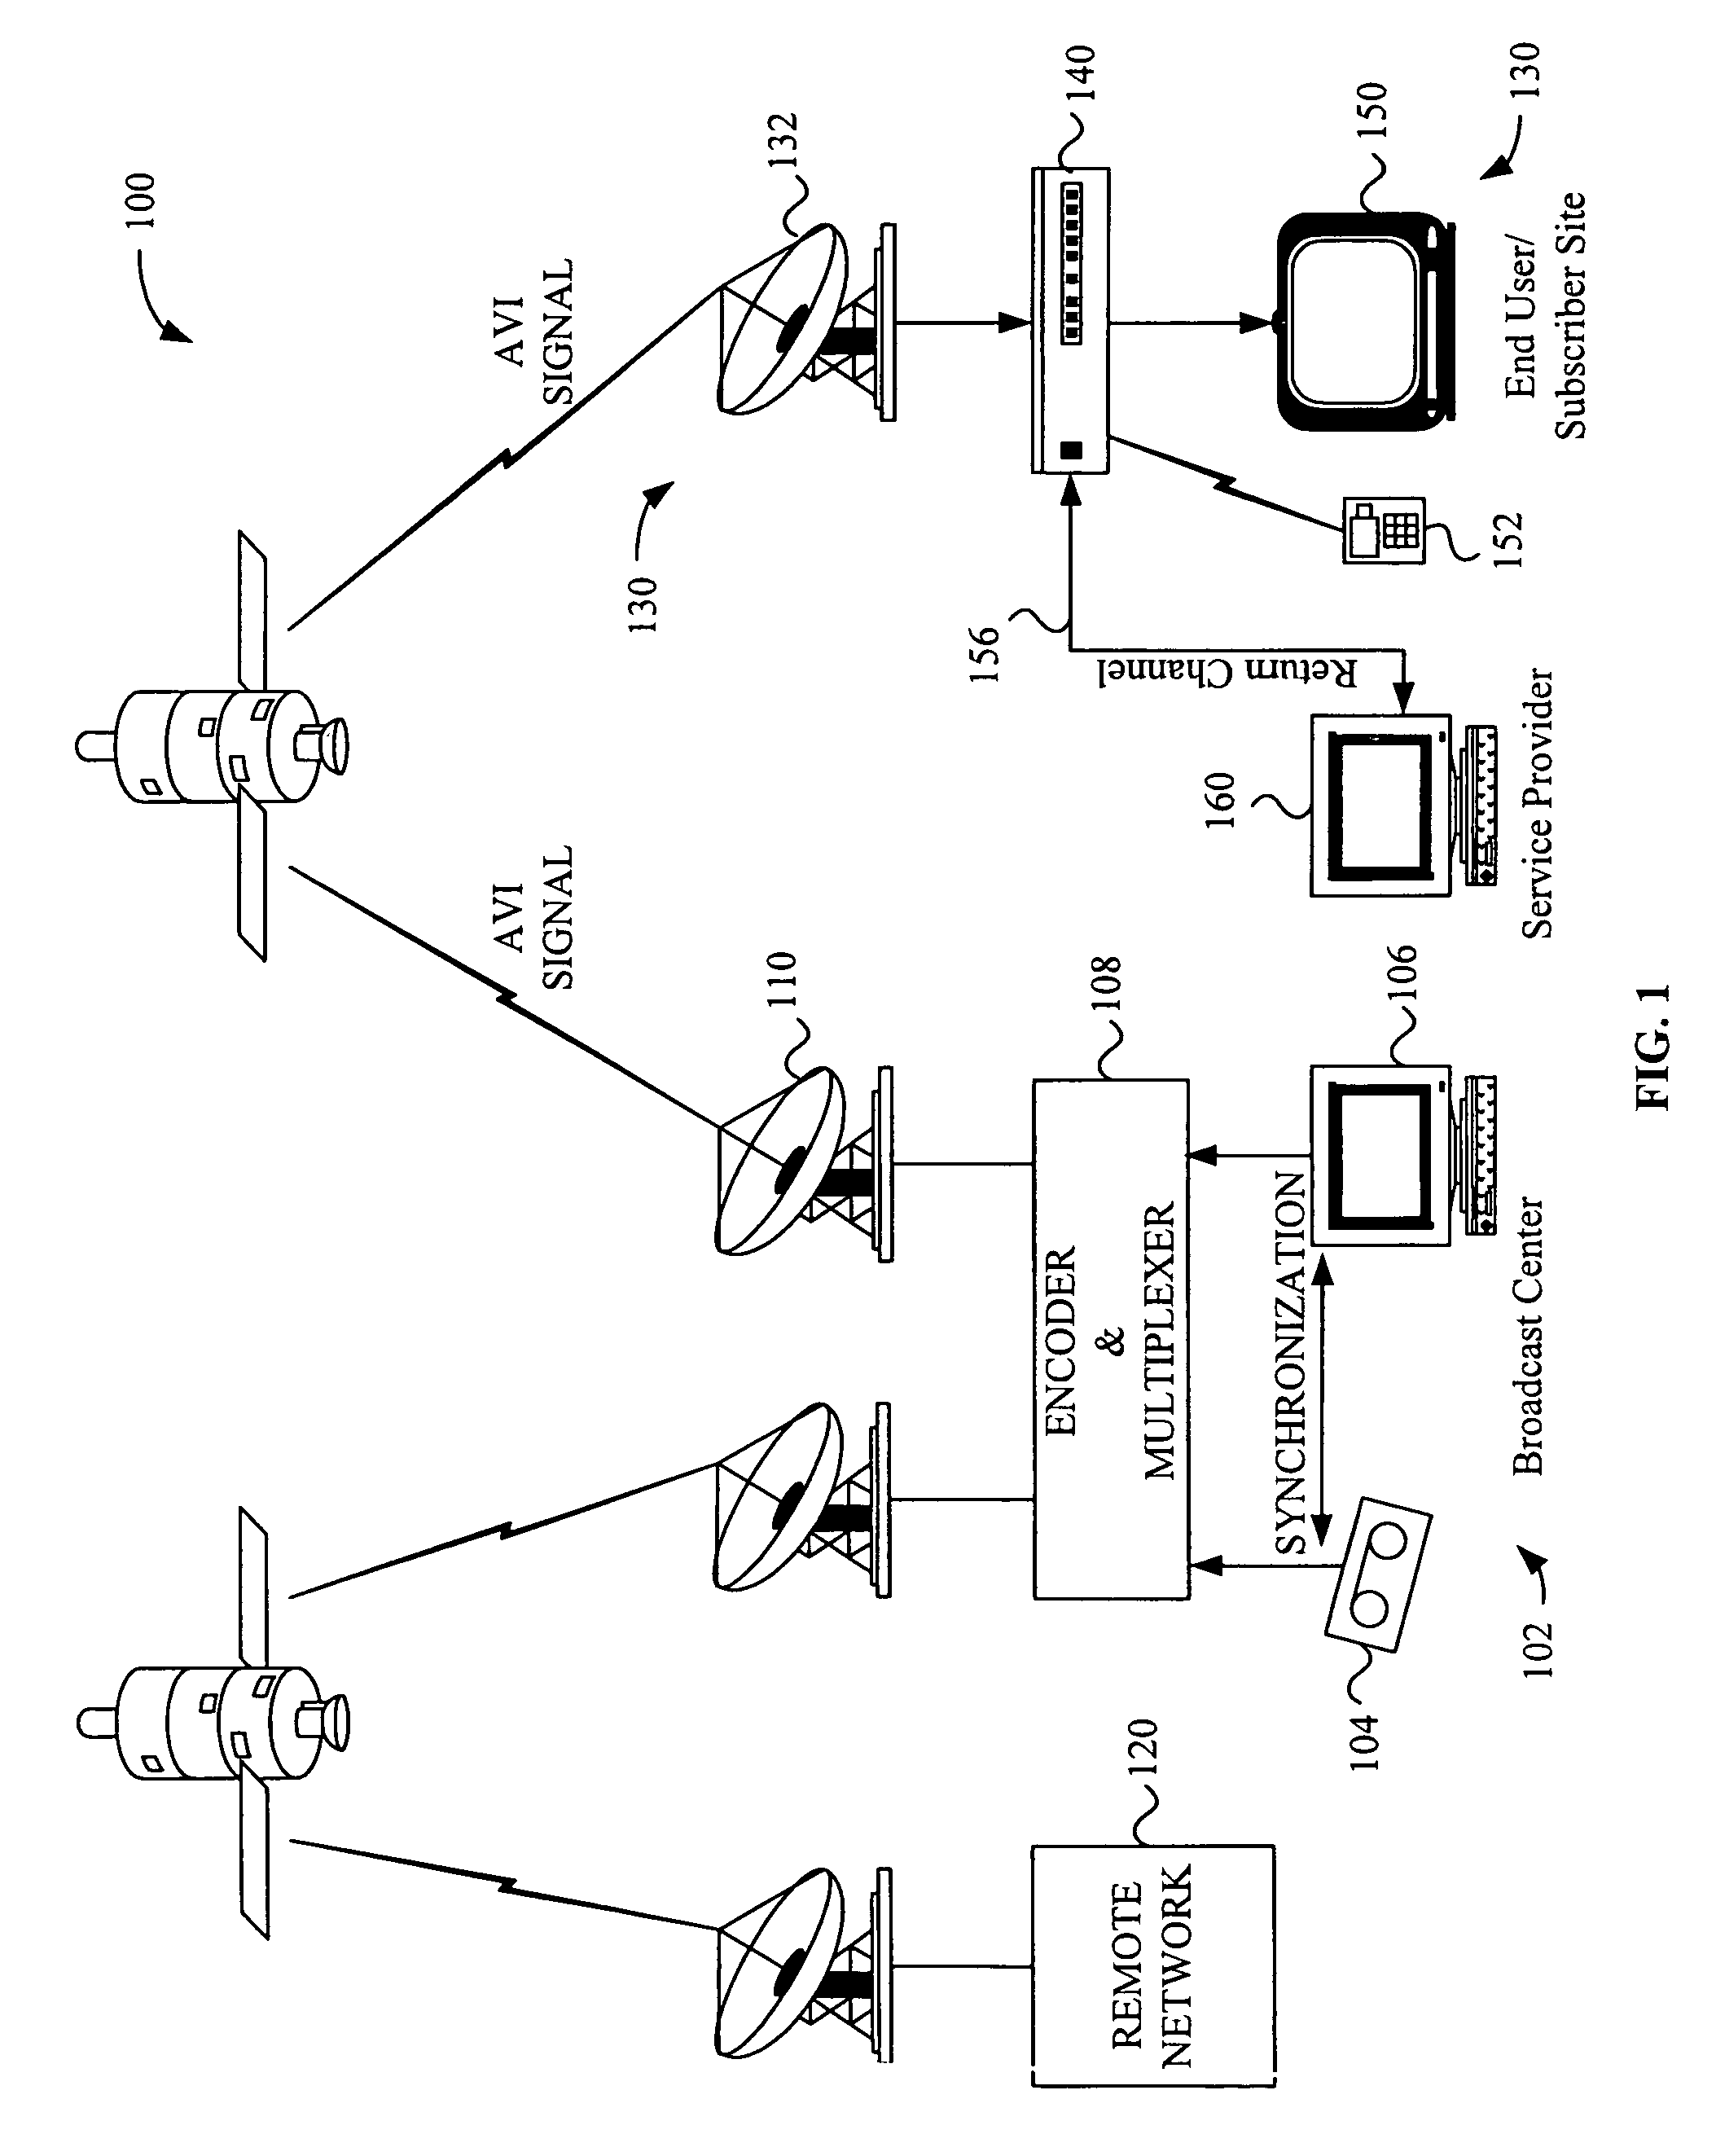 Interactive television system and method for simultaneous transmission and rendering of multiple MPEG-encoded video streams